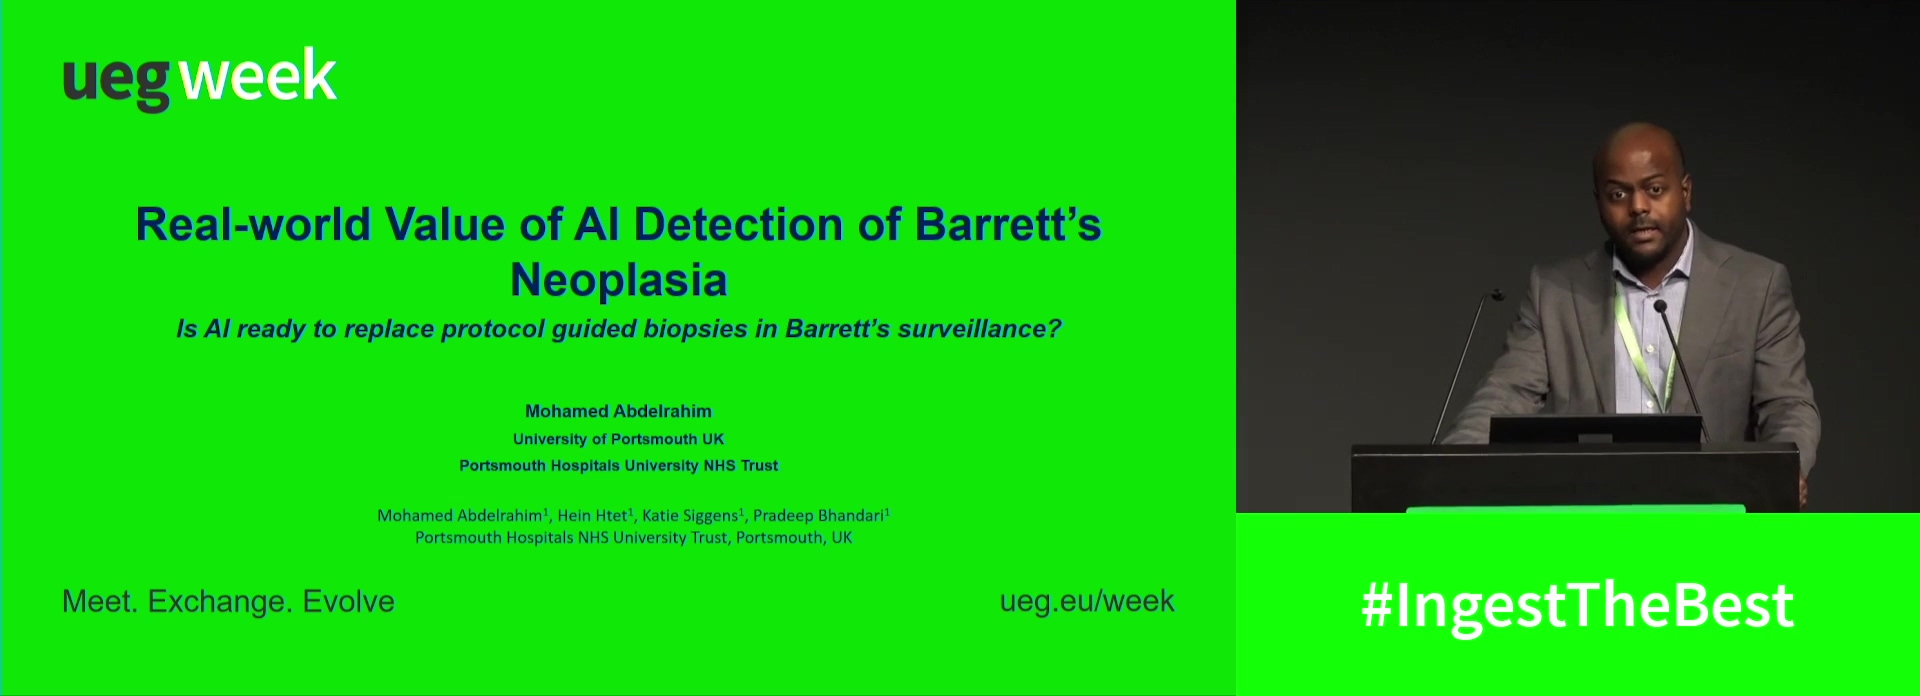 IS AI READY TO REPLACE PROTOCOL GUIDED BIOPSIES IN BARRETT’S SURVEILLANCE? THE FIRST REAL-WORLD EXPERIENCE